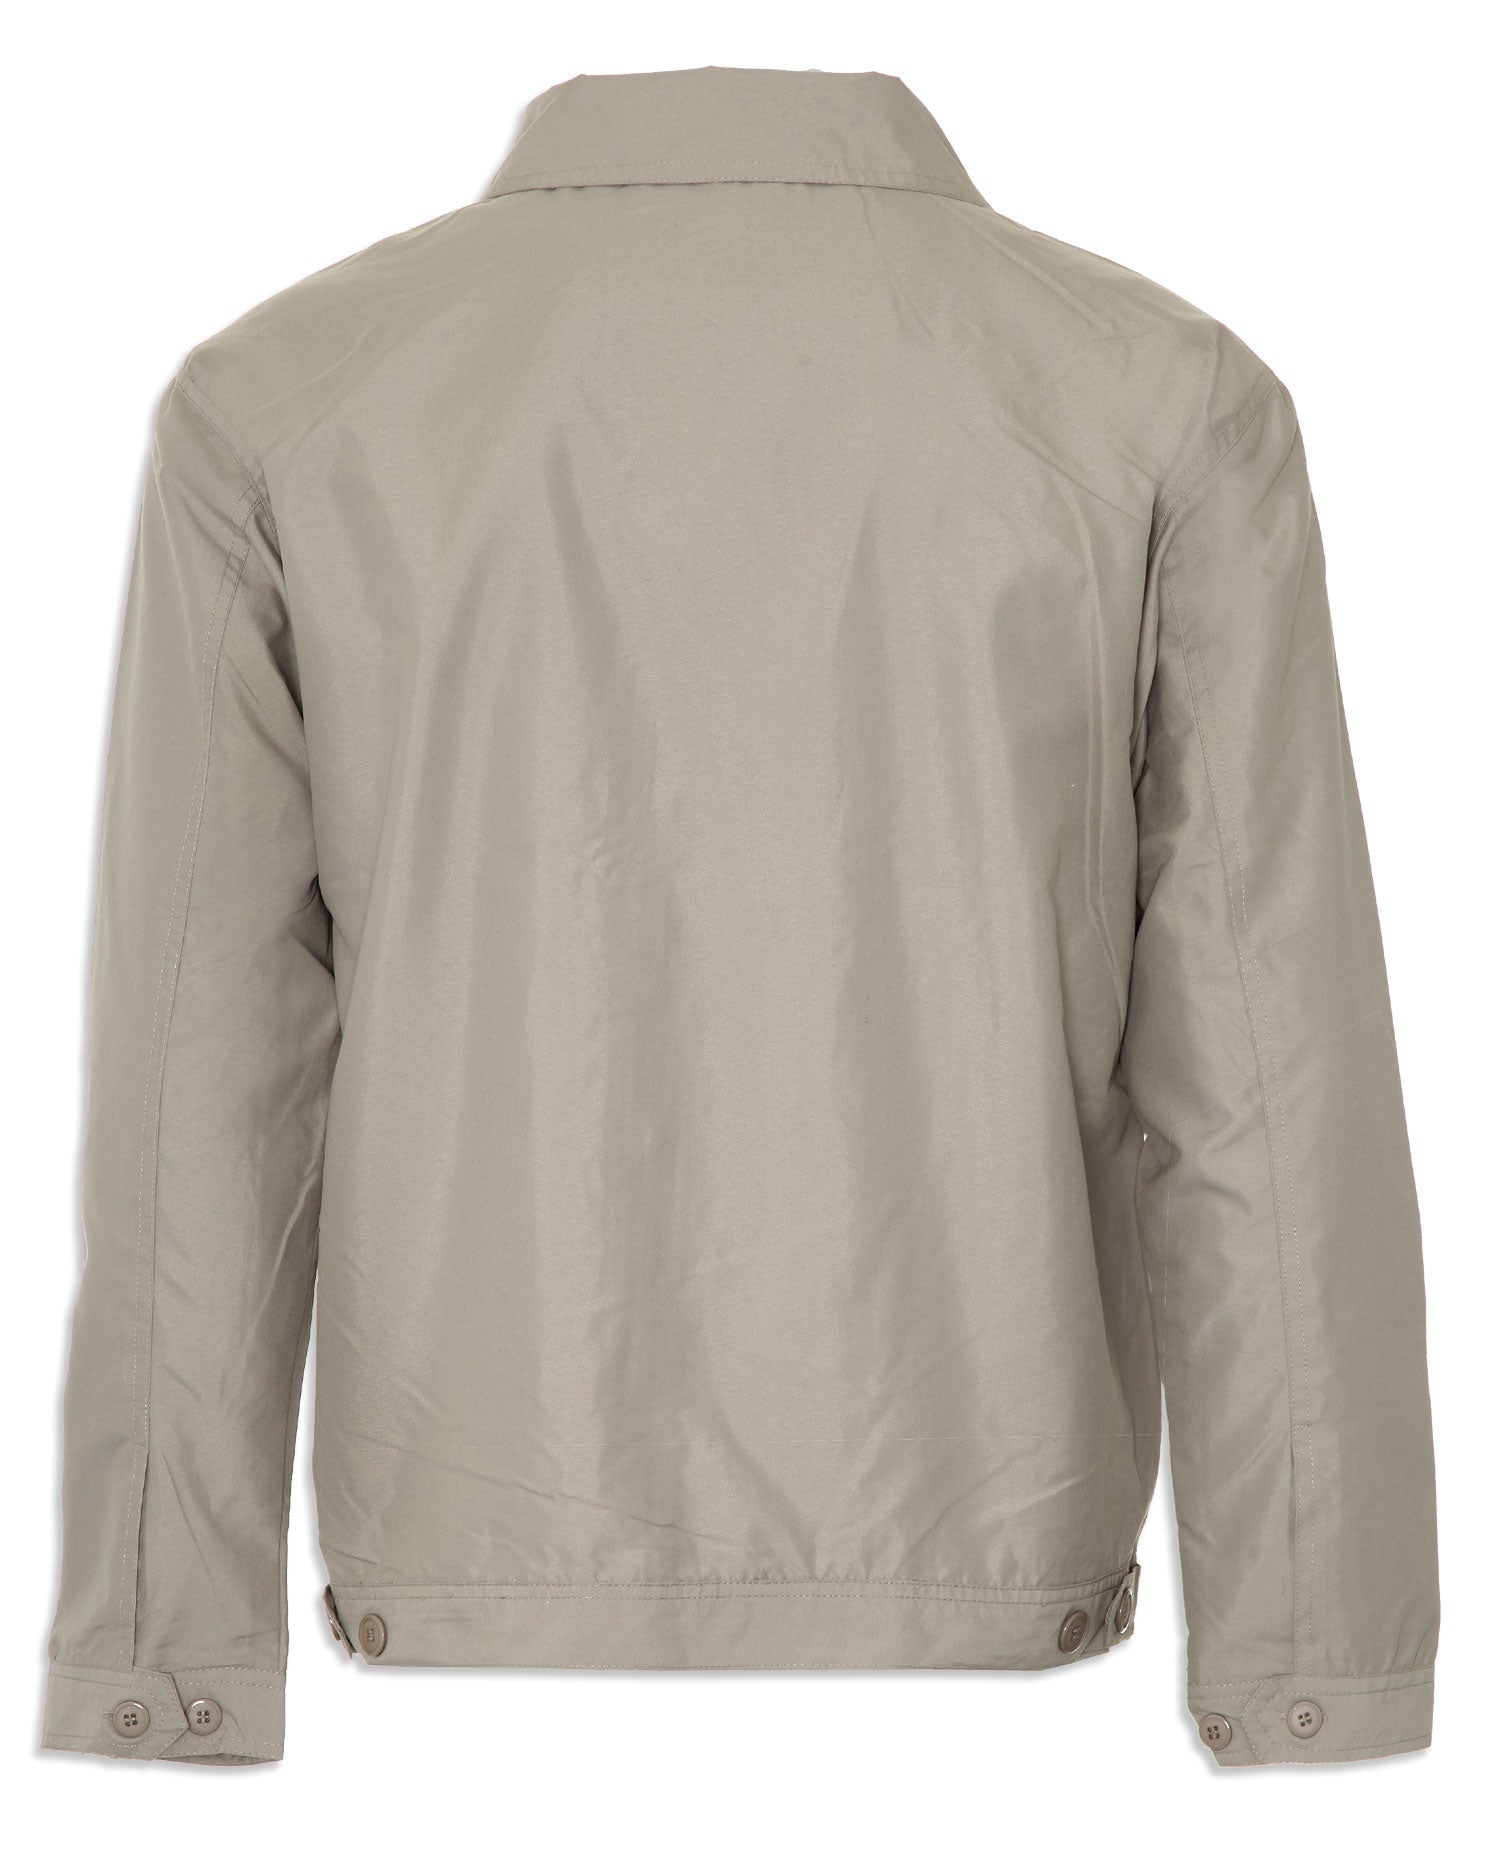 back view Birkdale jacket in stone colour